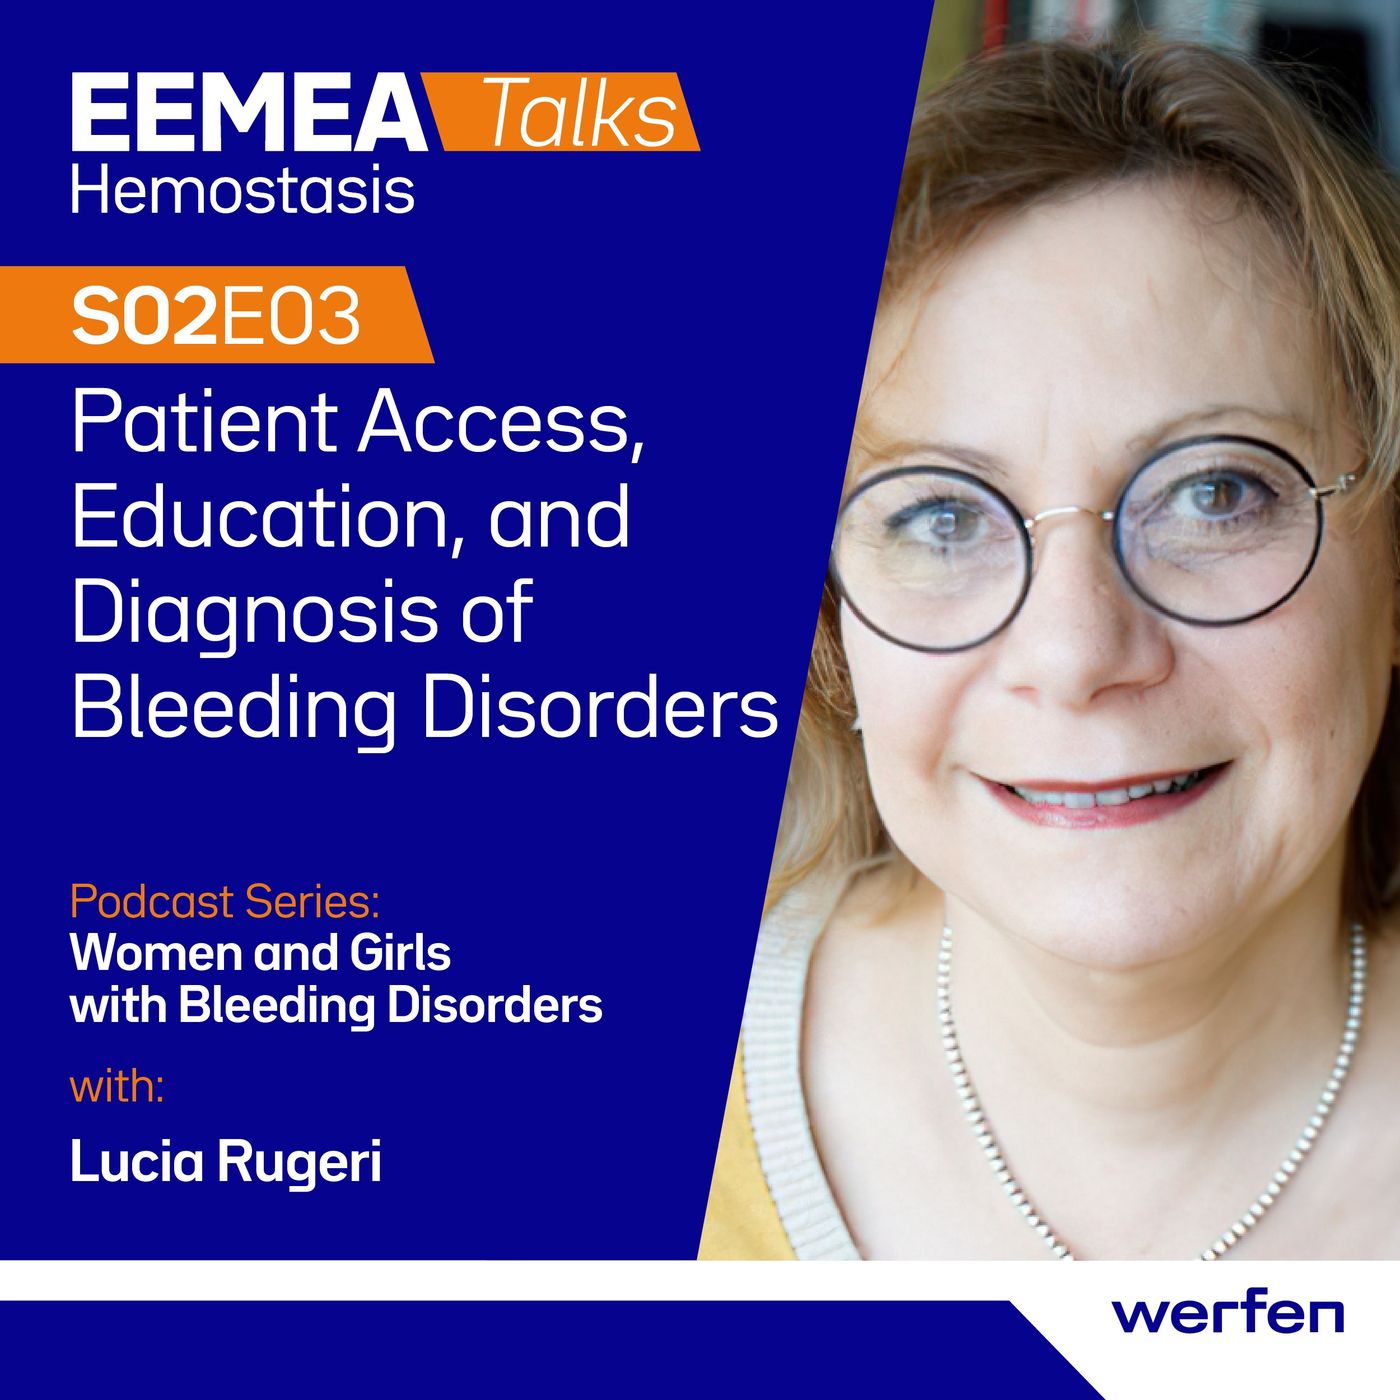 Women and Bleeding Disorders S02E03 - Patient Access, Education, and Diagnosis of Bleeding Disorders